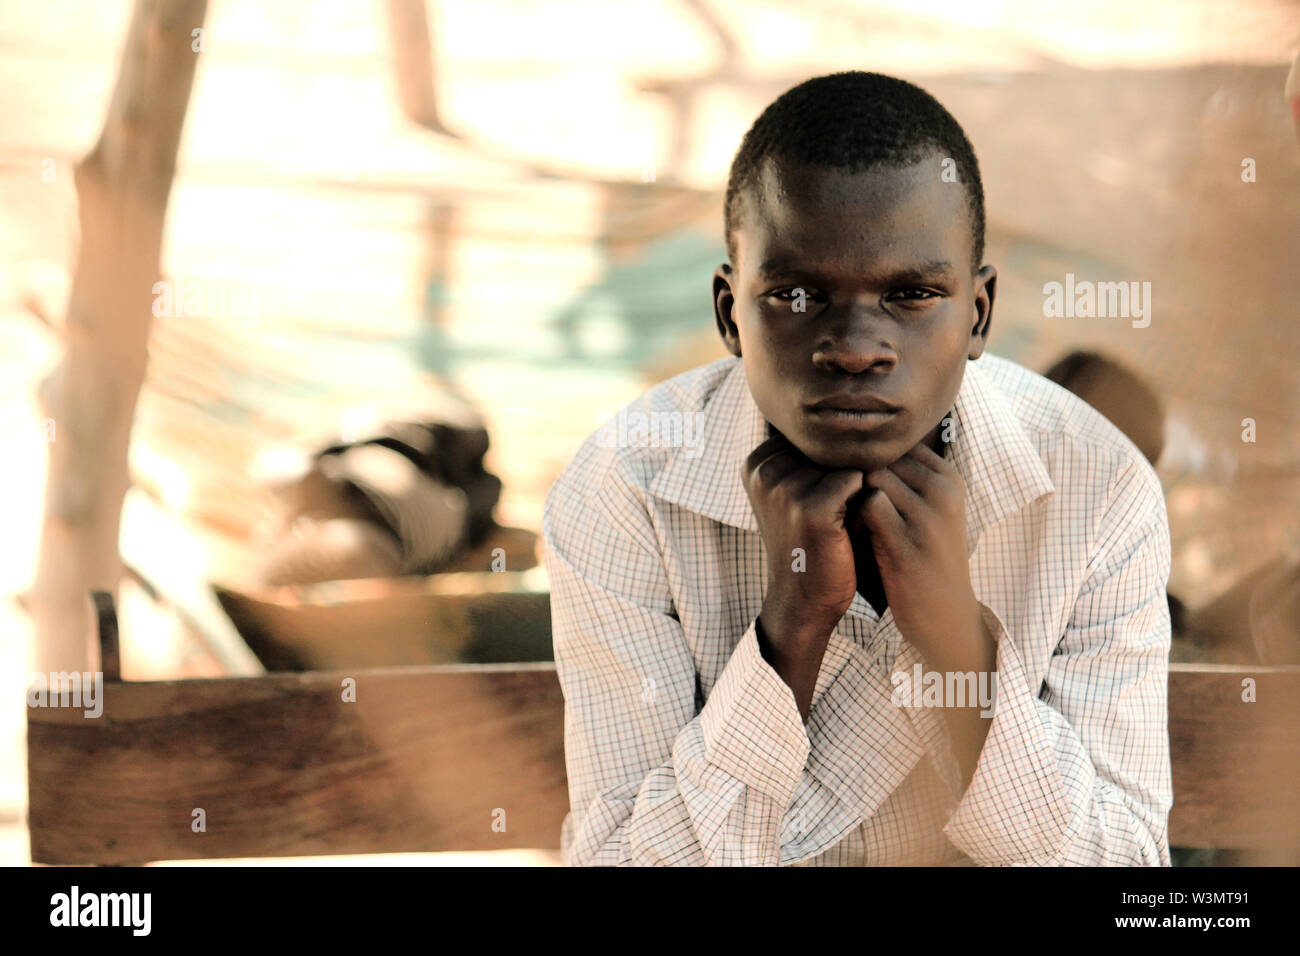 At Sangere in Girei, Adamawa state, are students and pupils some of whom have lost either one or both of their parents to insurgency. At the same location, one of such victims poses for a personal portrait. Stock Photo